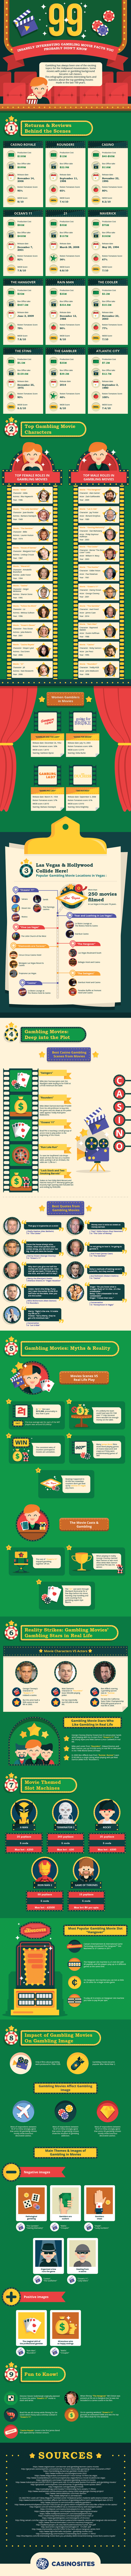 gambling movie facts infographic